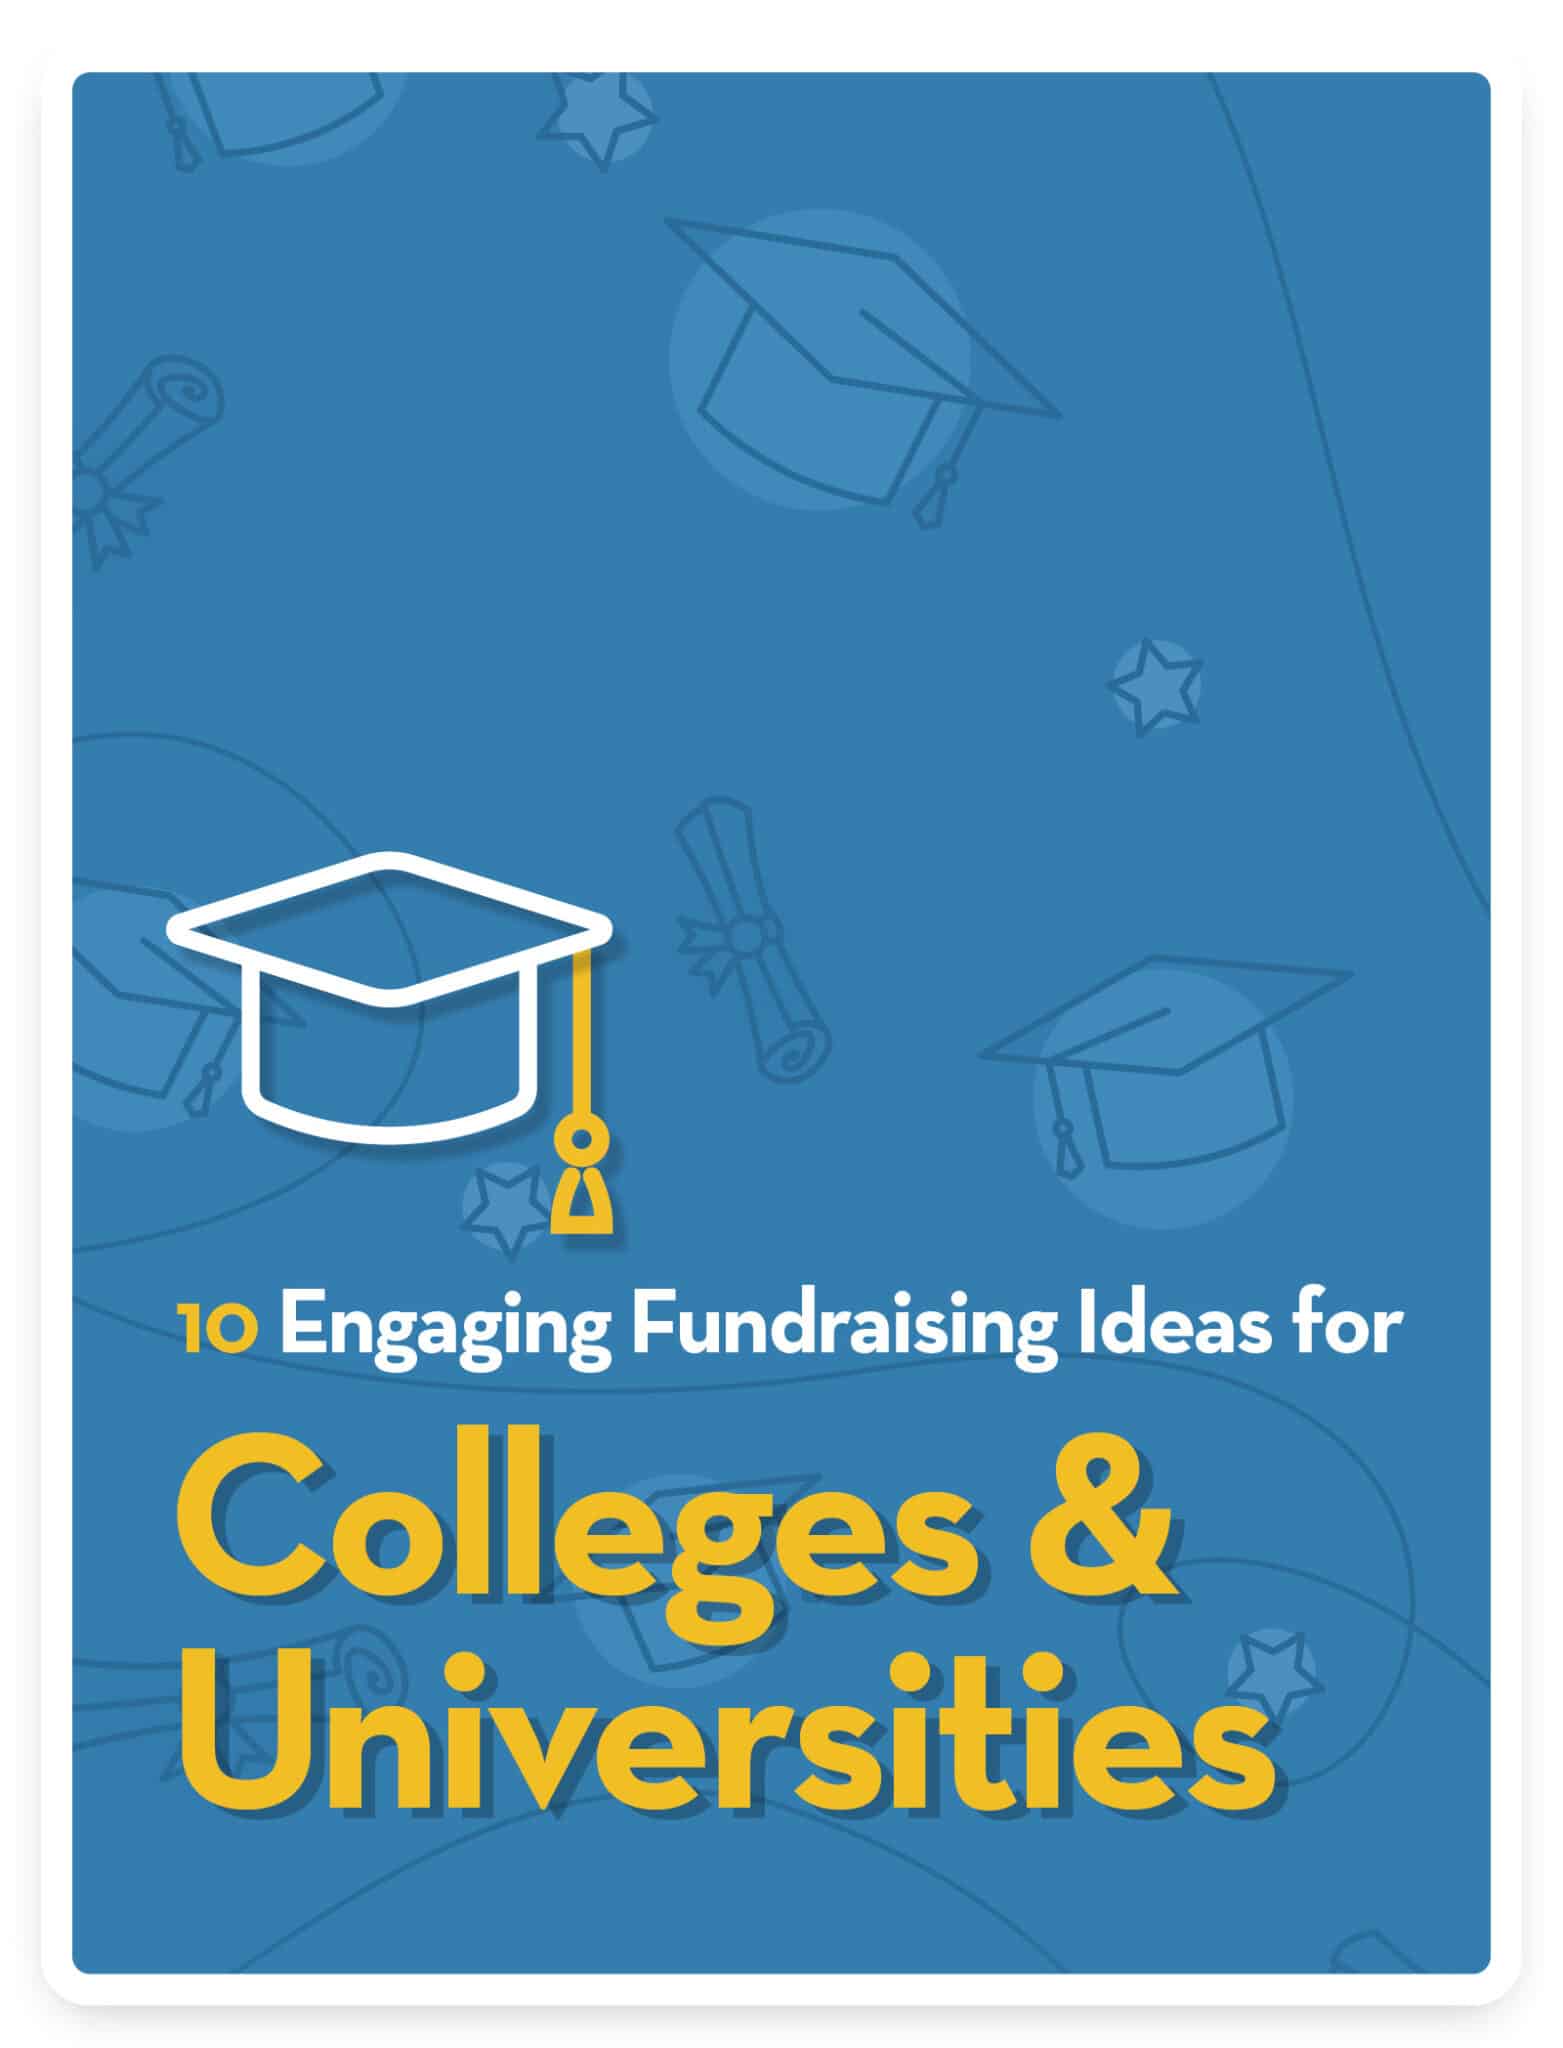 Engaging Fundraising Ideas for Colleges & Universities